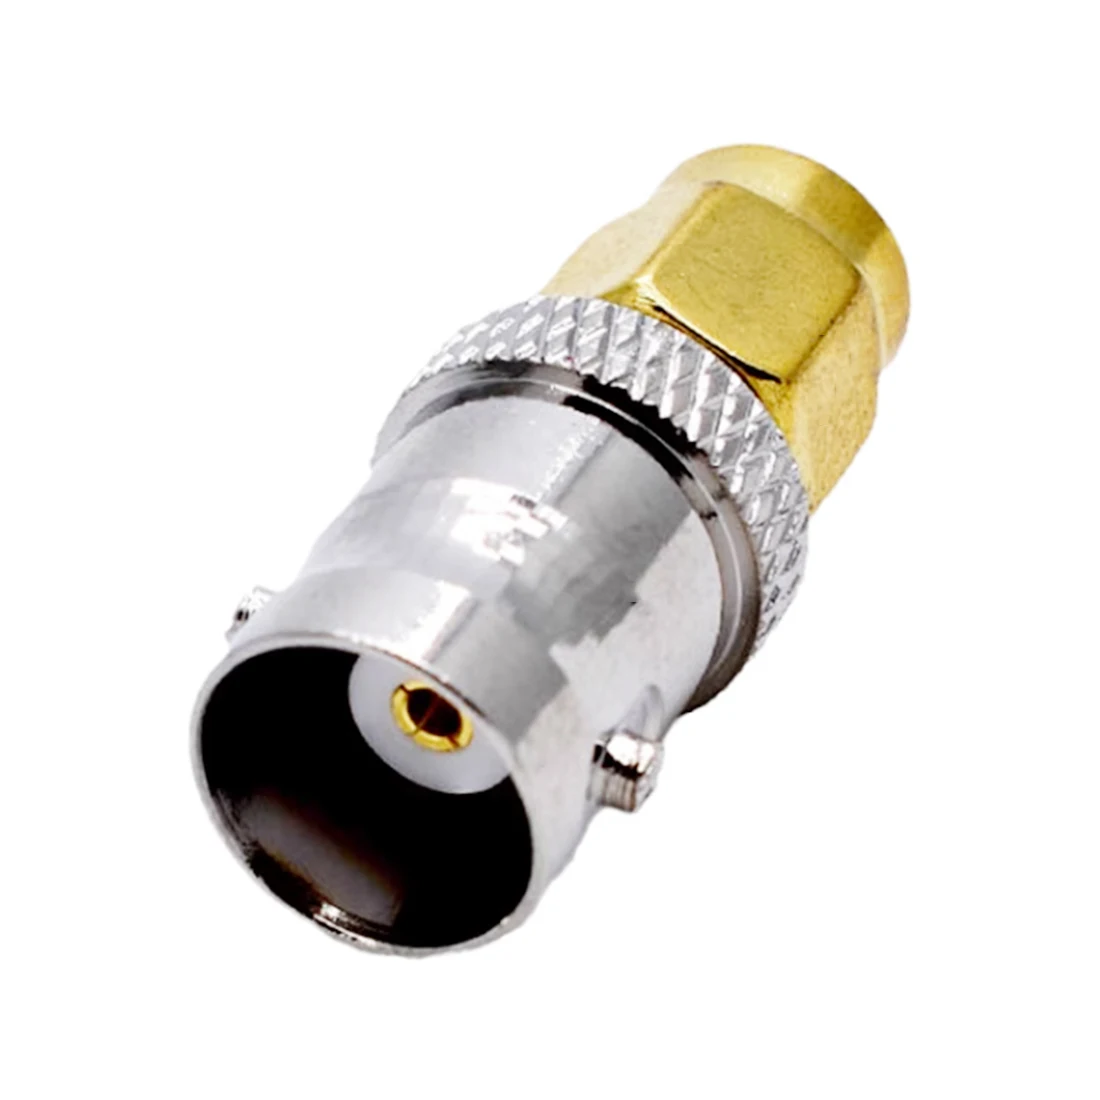 1pc BNC Female Jack to SMA Male Plug RF Coax Adapter Convertor Straight Nickelplated New Wholesale For CCTV